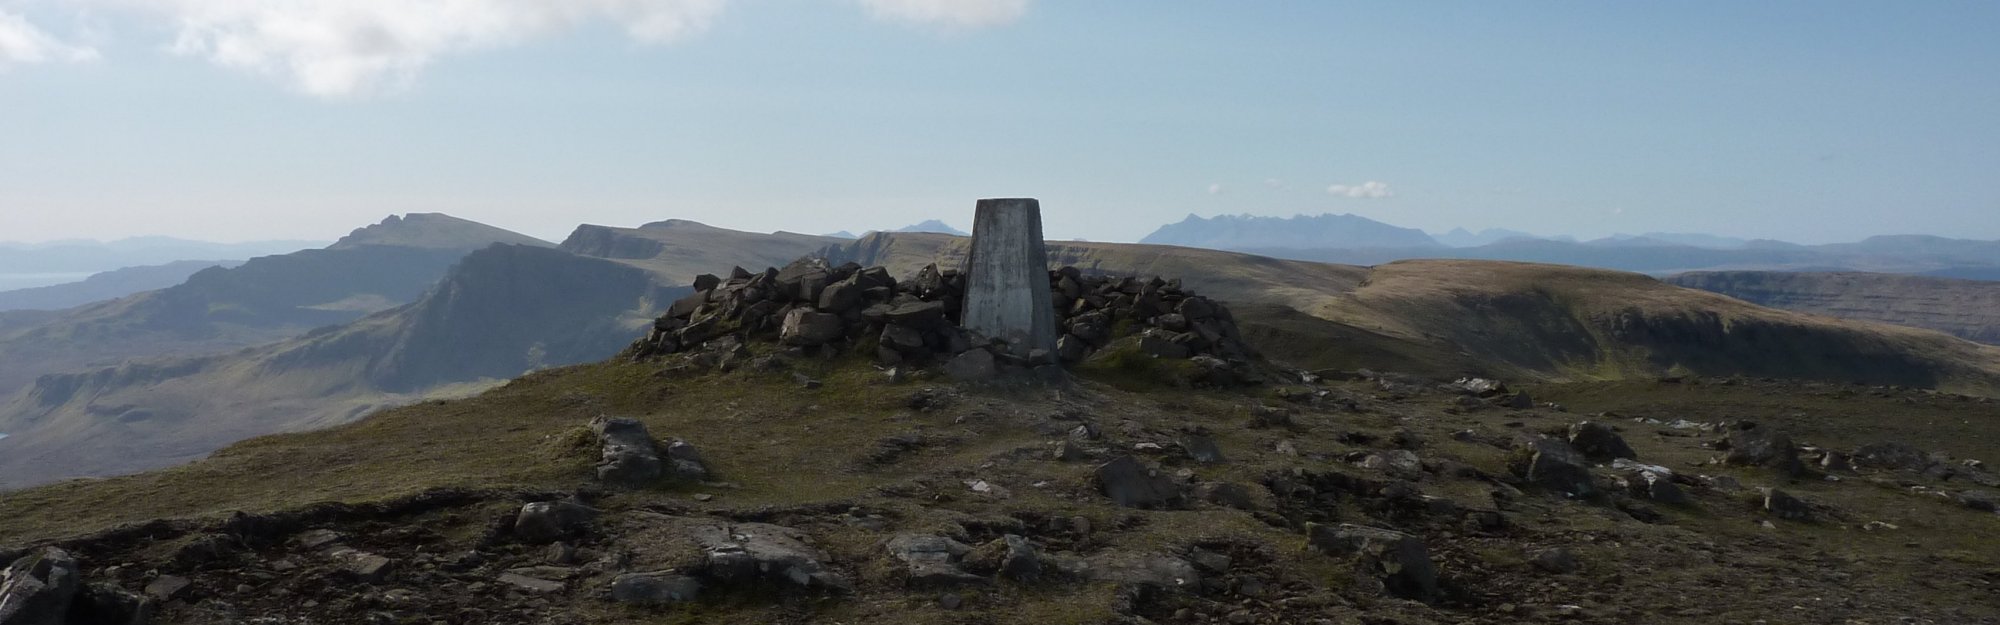 Trig point and shelter on summit of Beinn Edra, with the Storr far left behind